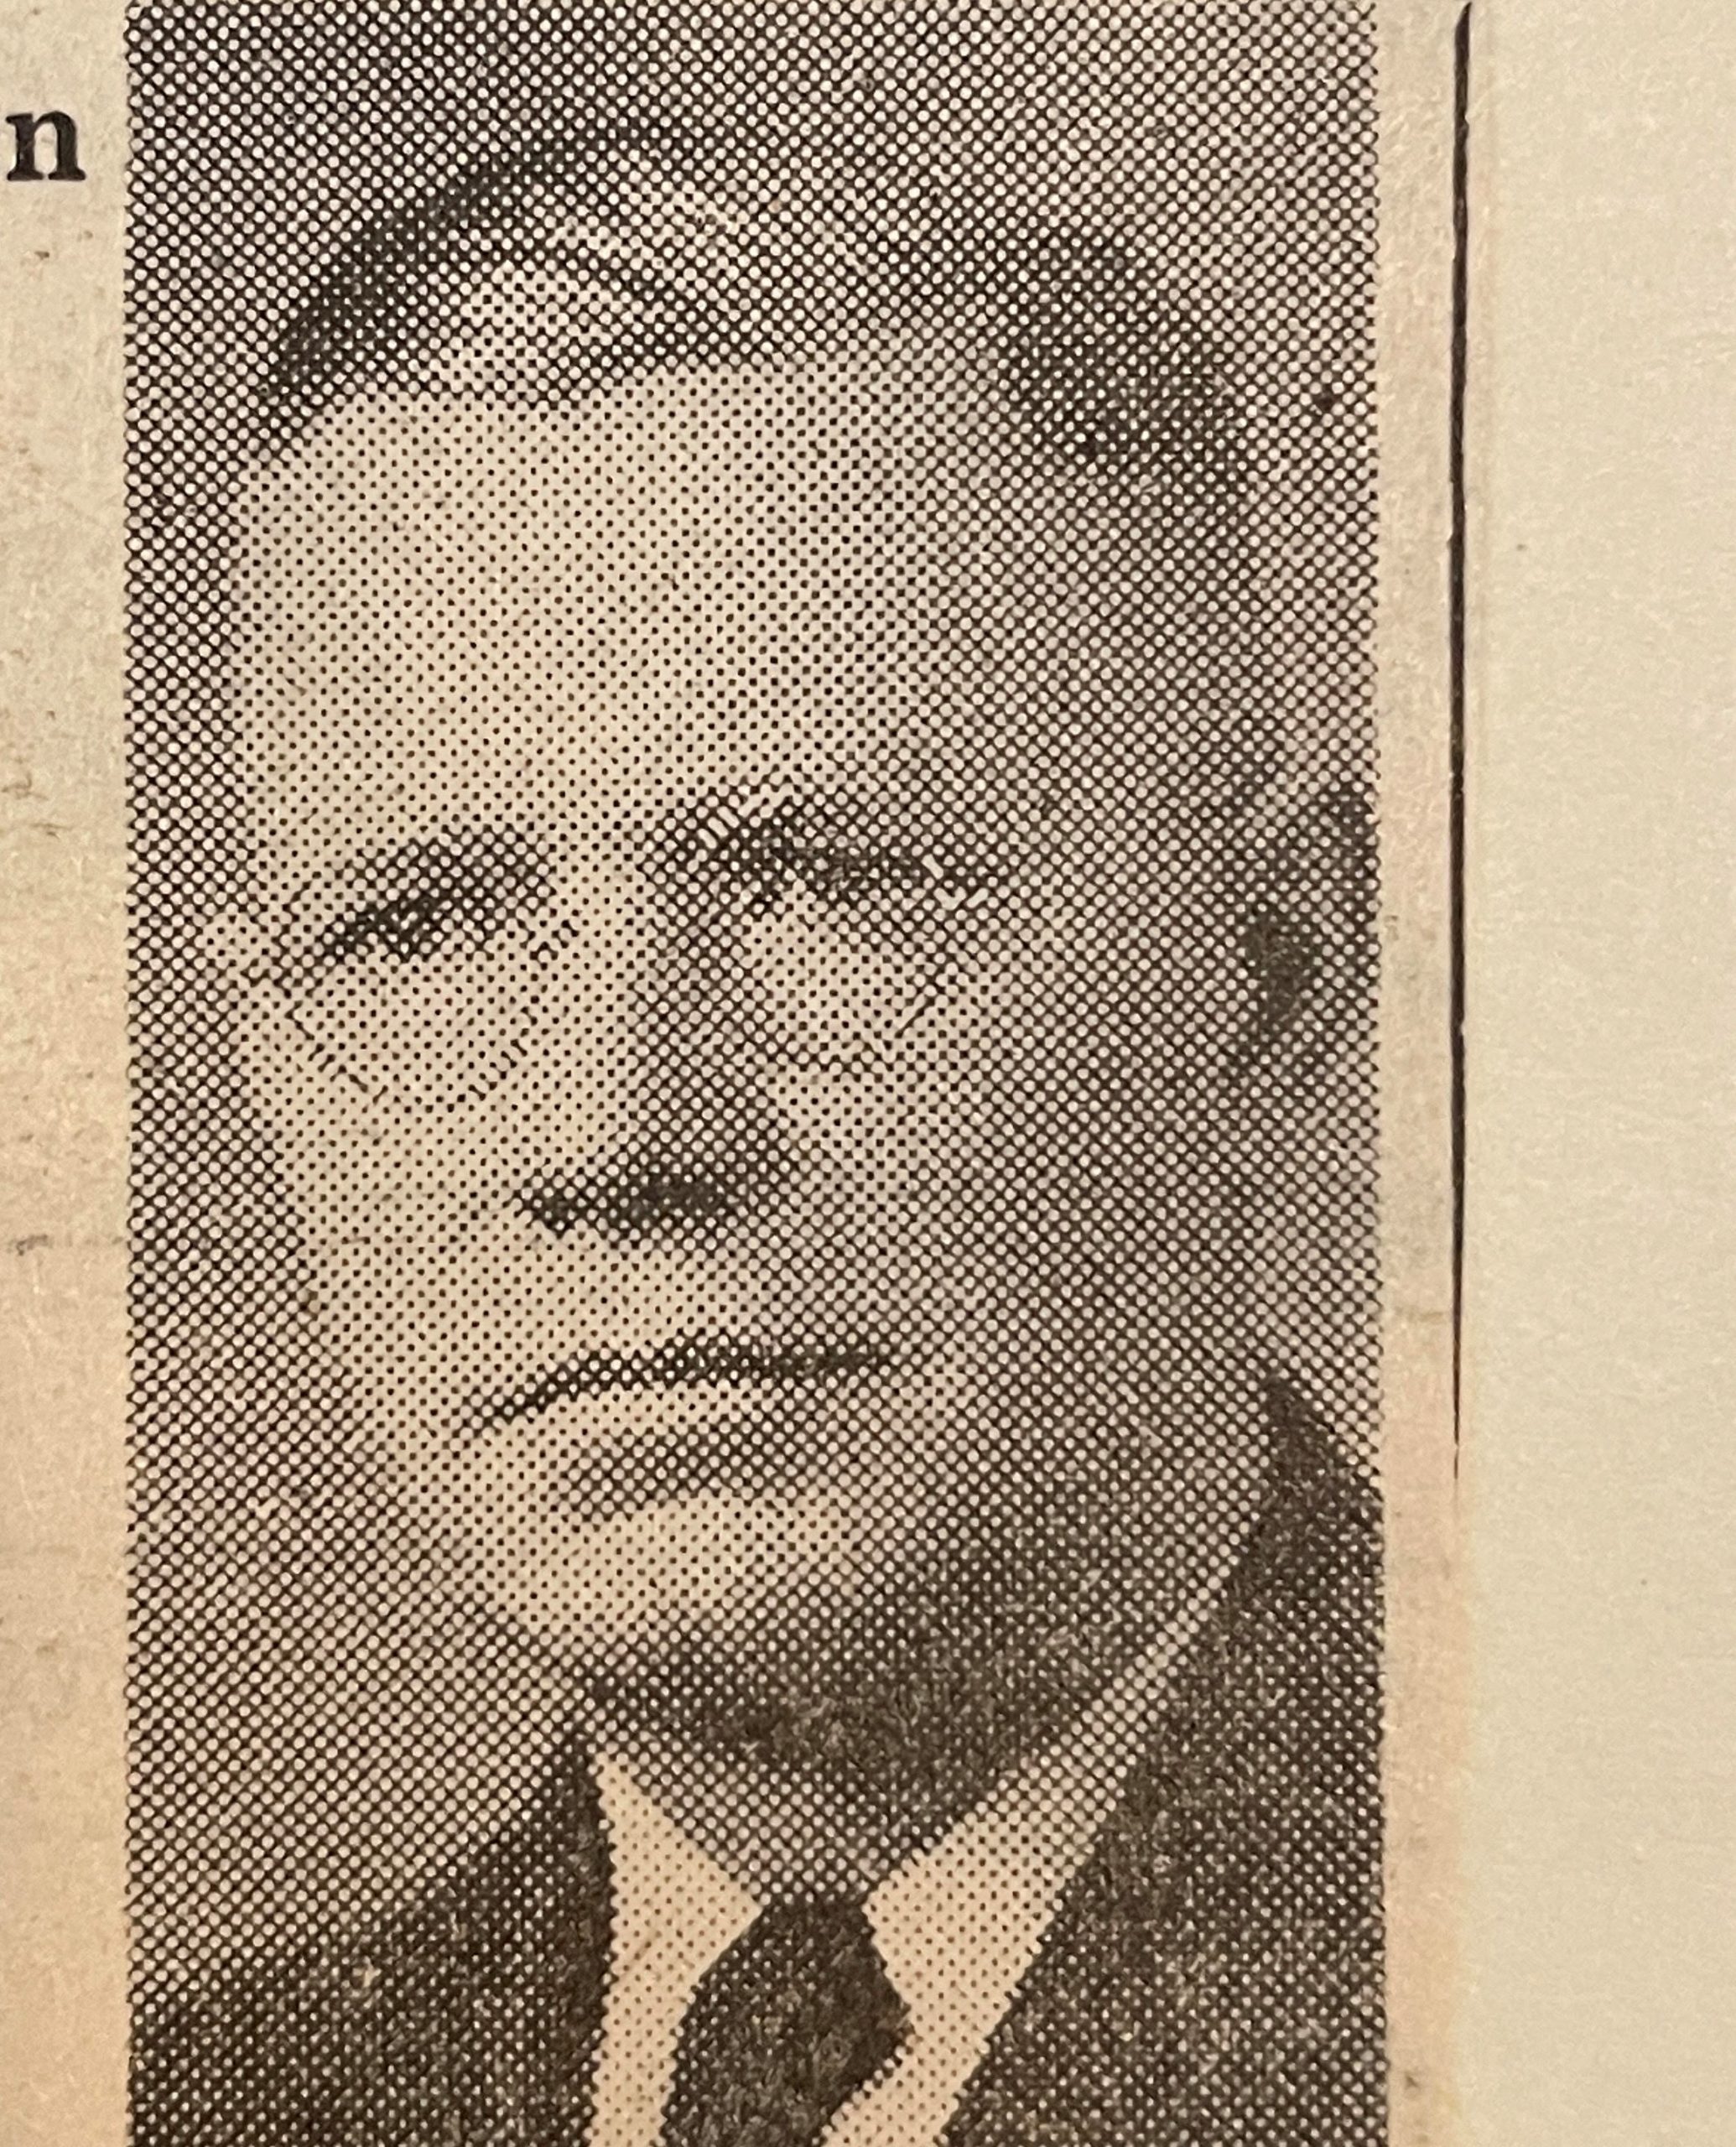 Past Master for 1949